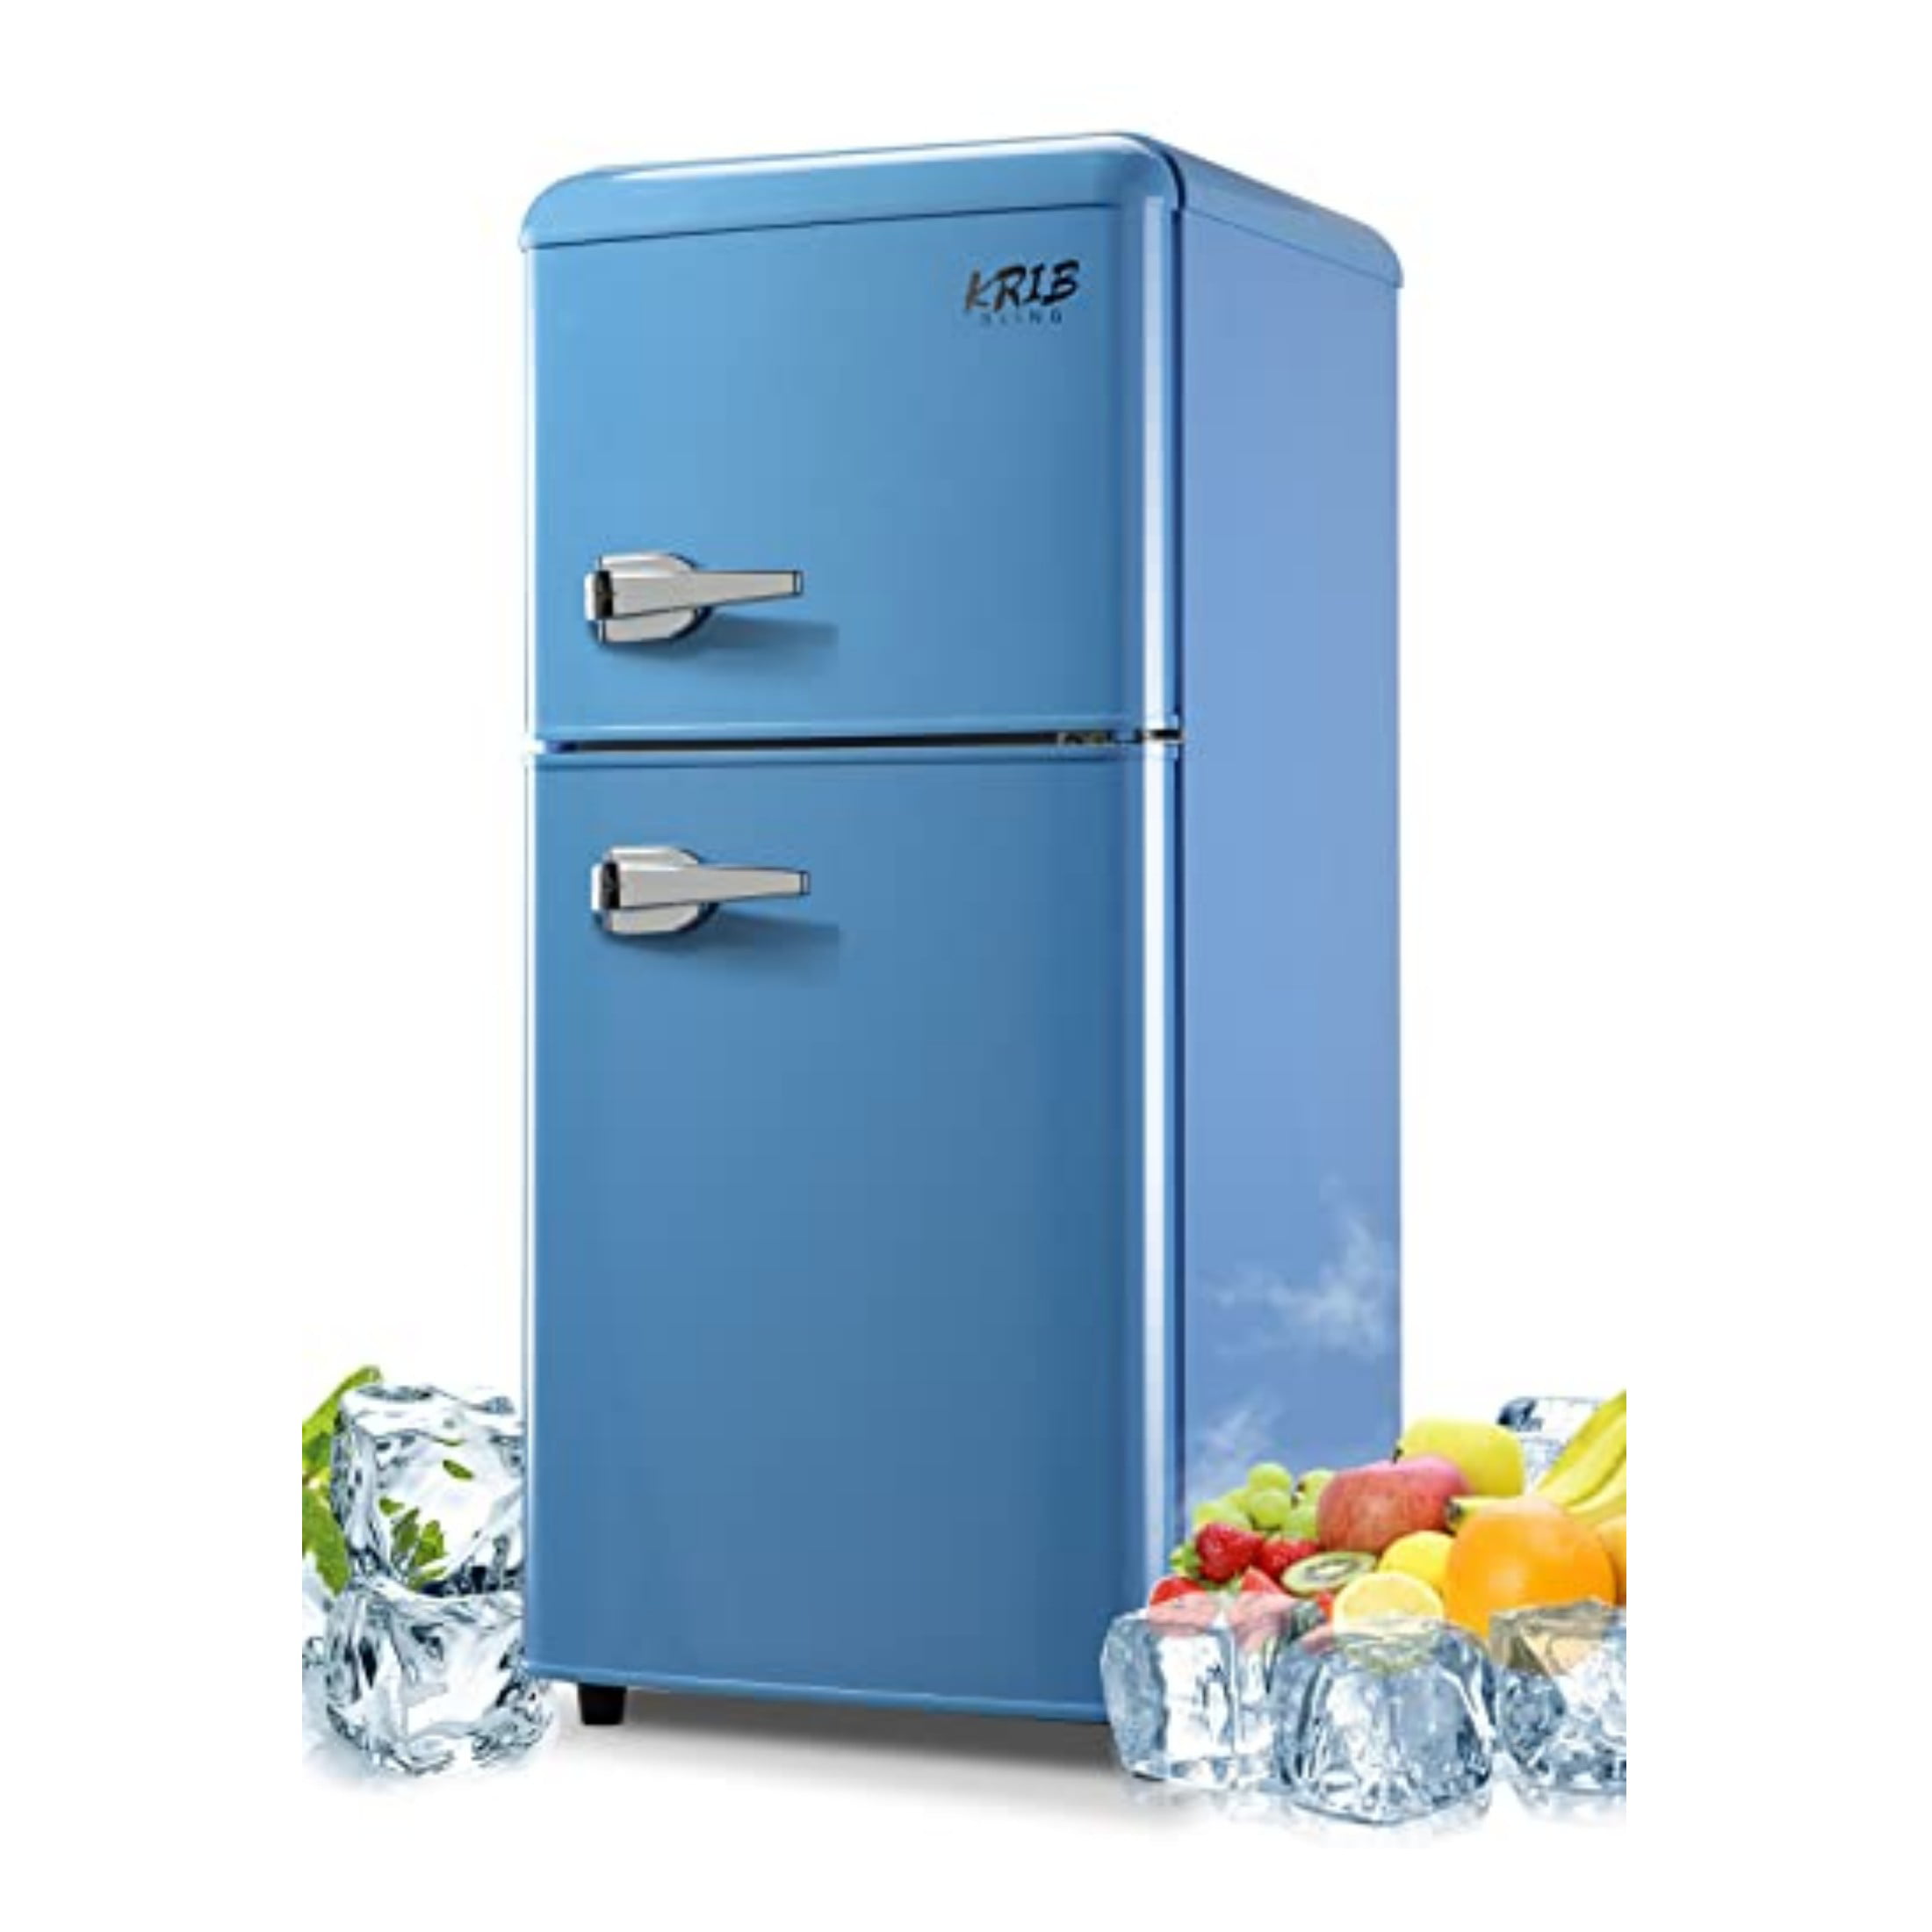 Compact Refrigerator With Freezer : Target